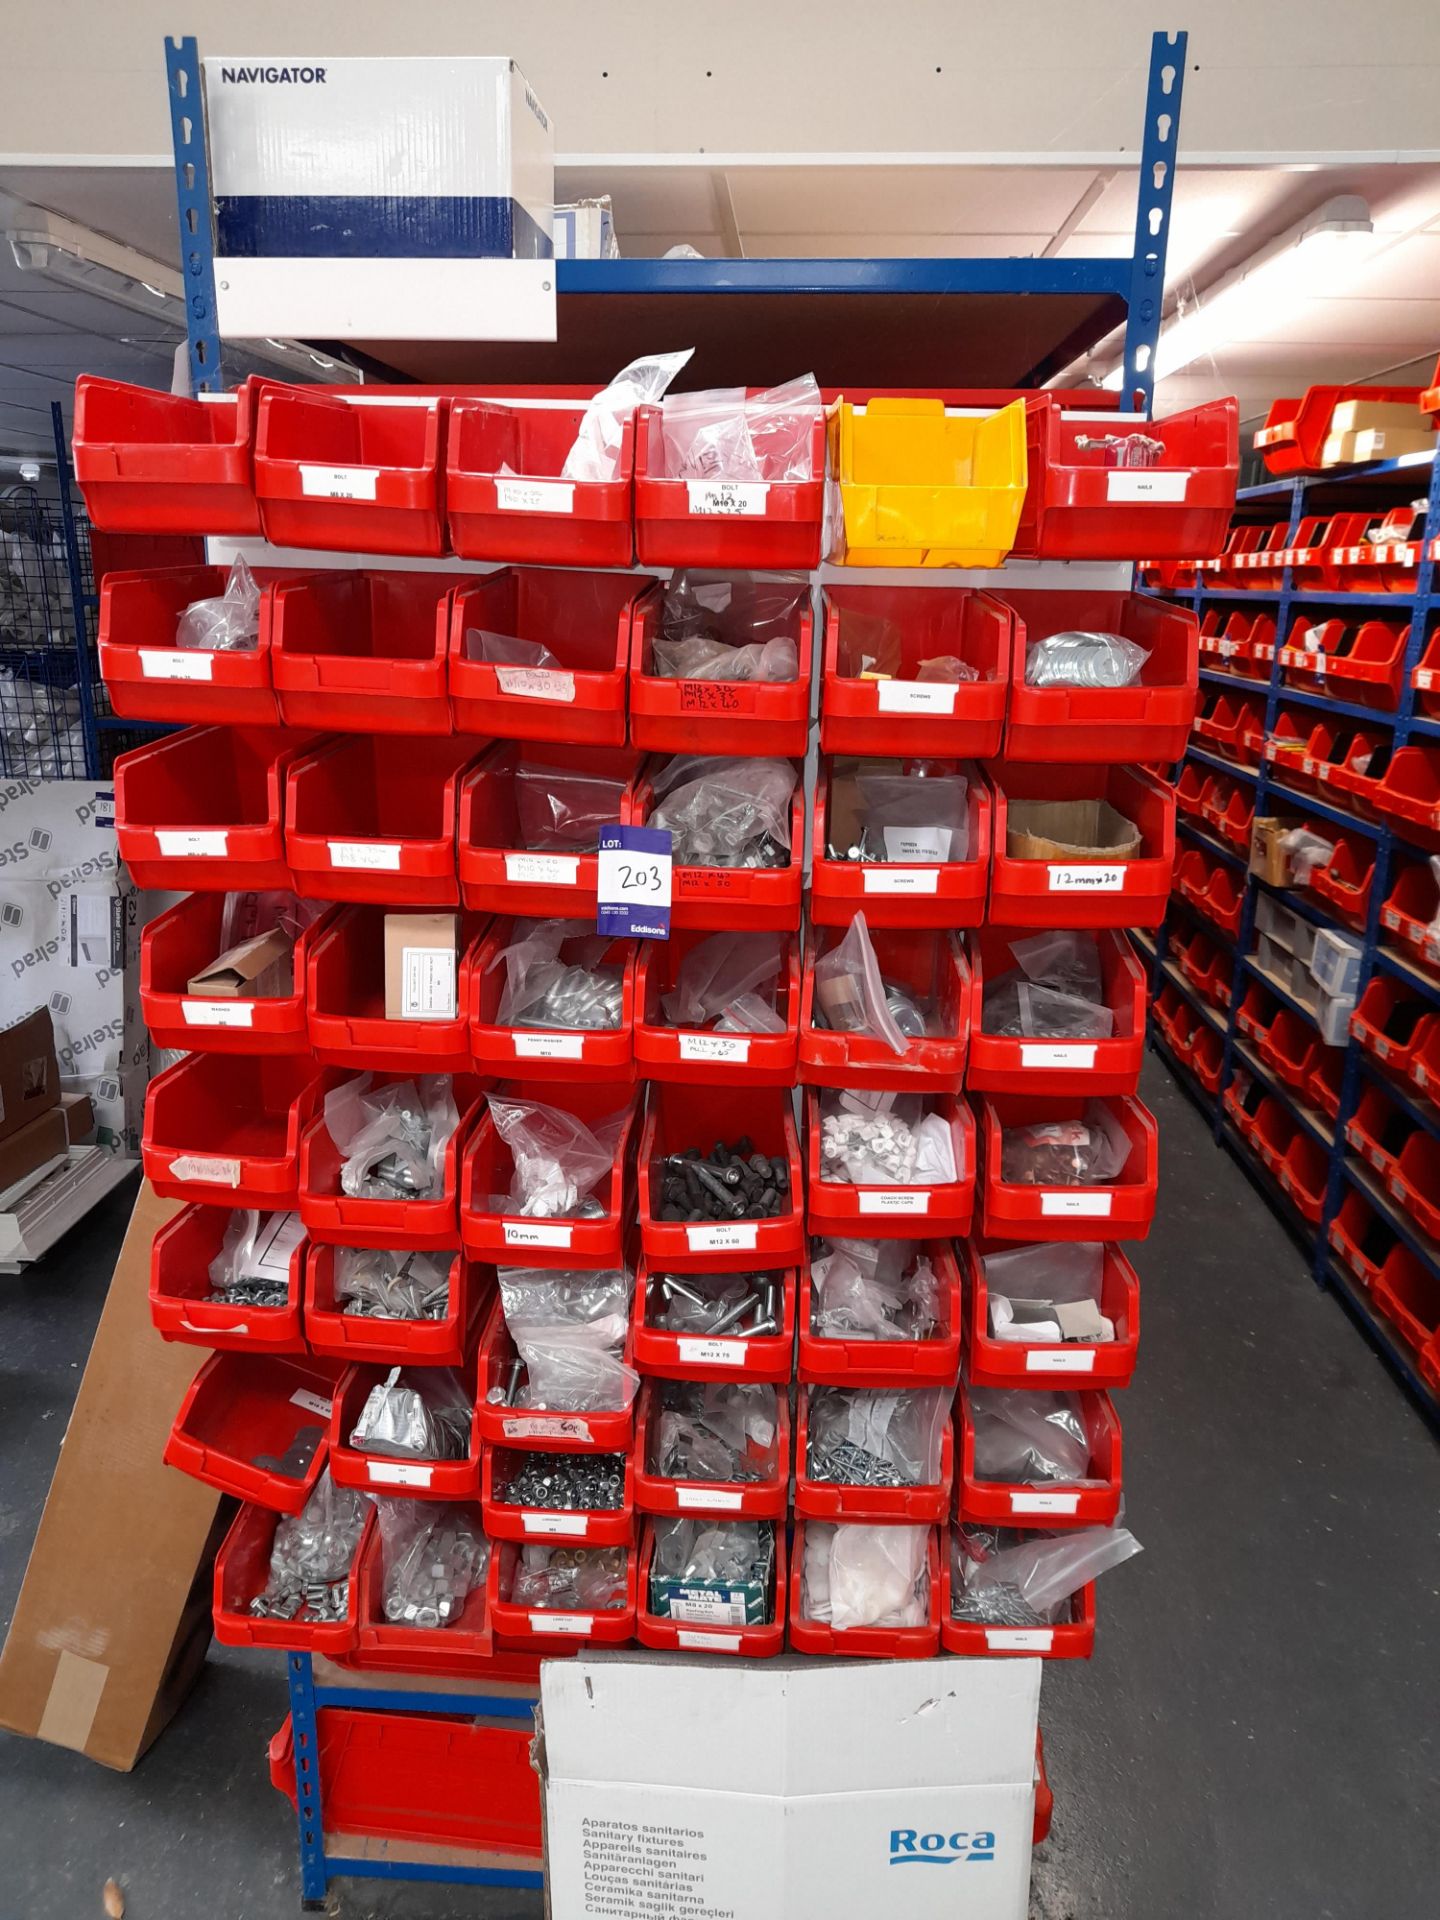 Contents to plastic linbins comprising various fixings (viewing strongly recommended to ascertain